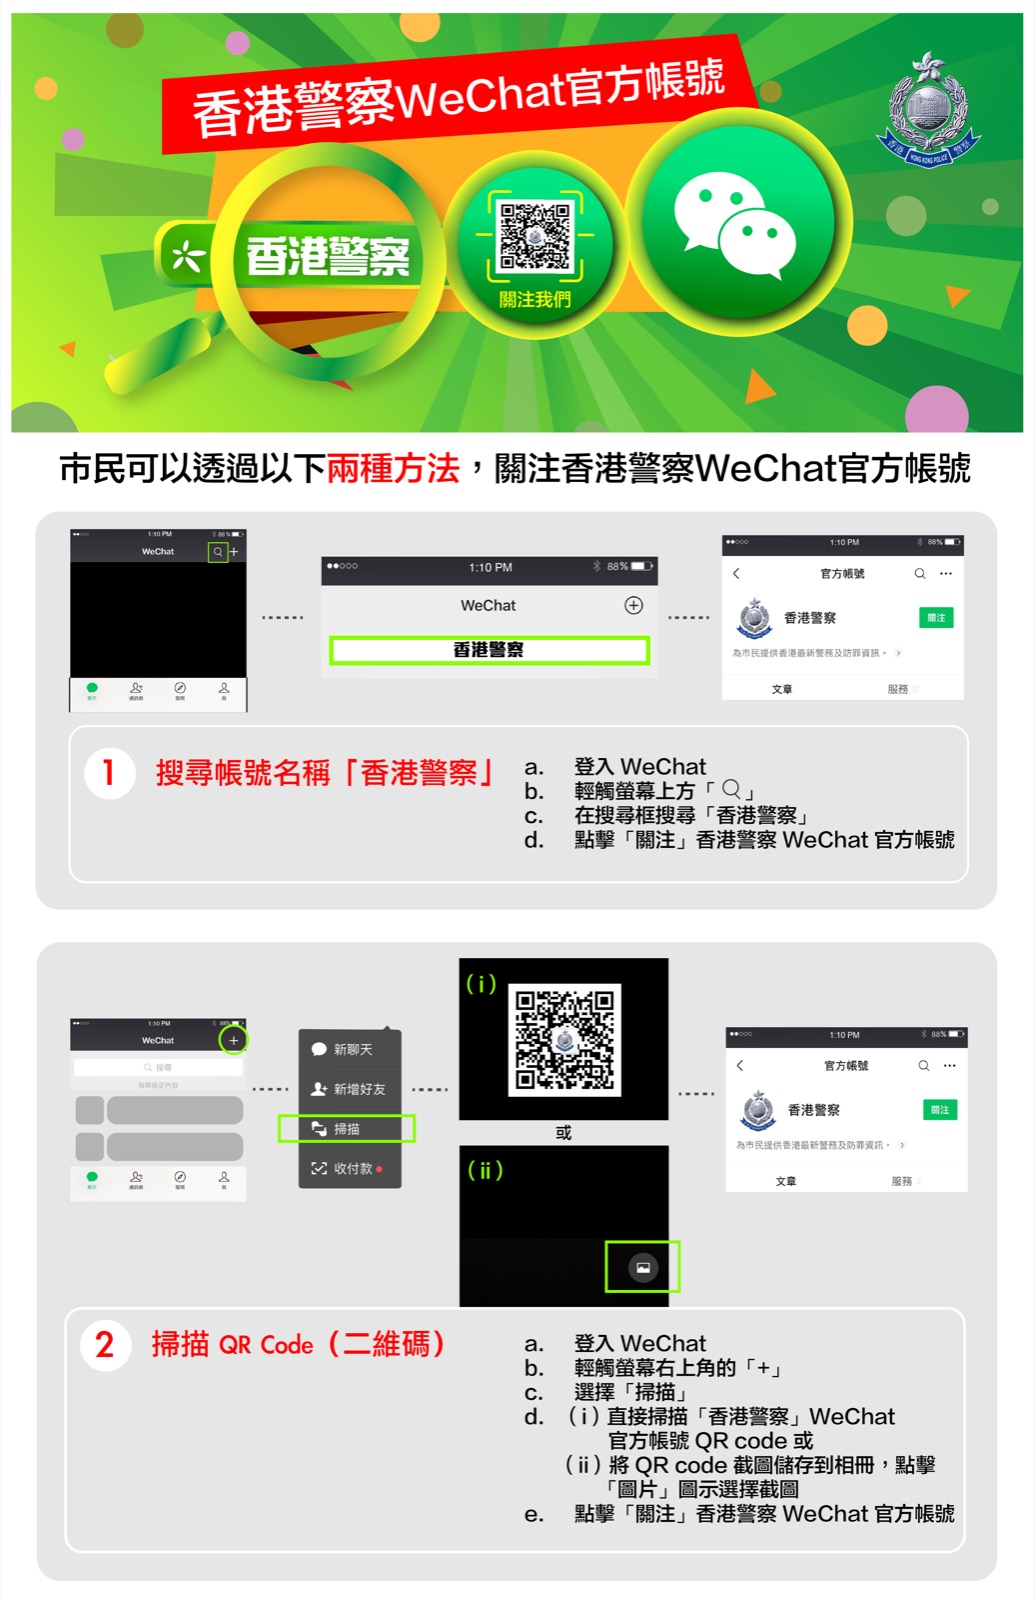 You can follow the official WeChat account of Hong Kong Police Force by: 1. Searching for WeChat ID “hongkong_policeforce” - Login WeChat and tap “magnifier” at the top of your screen. Type in “hongkong_policeforce” and search. Click “Follow” to follow the official WeChat account of Hong Kong Police Force. 
              2. Scanning the QR Code - Login WeChat and tap “+” in the top right corner. Choose “Scan” to scan the QR Code directly or import the screenshot of the QR code from photo gallery. Click “Follow” to follow the official WeChat account of Hong Kong Police Force.